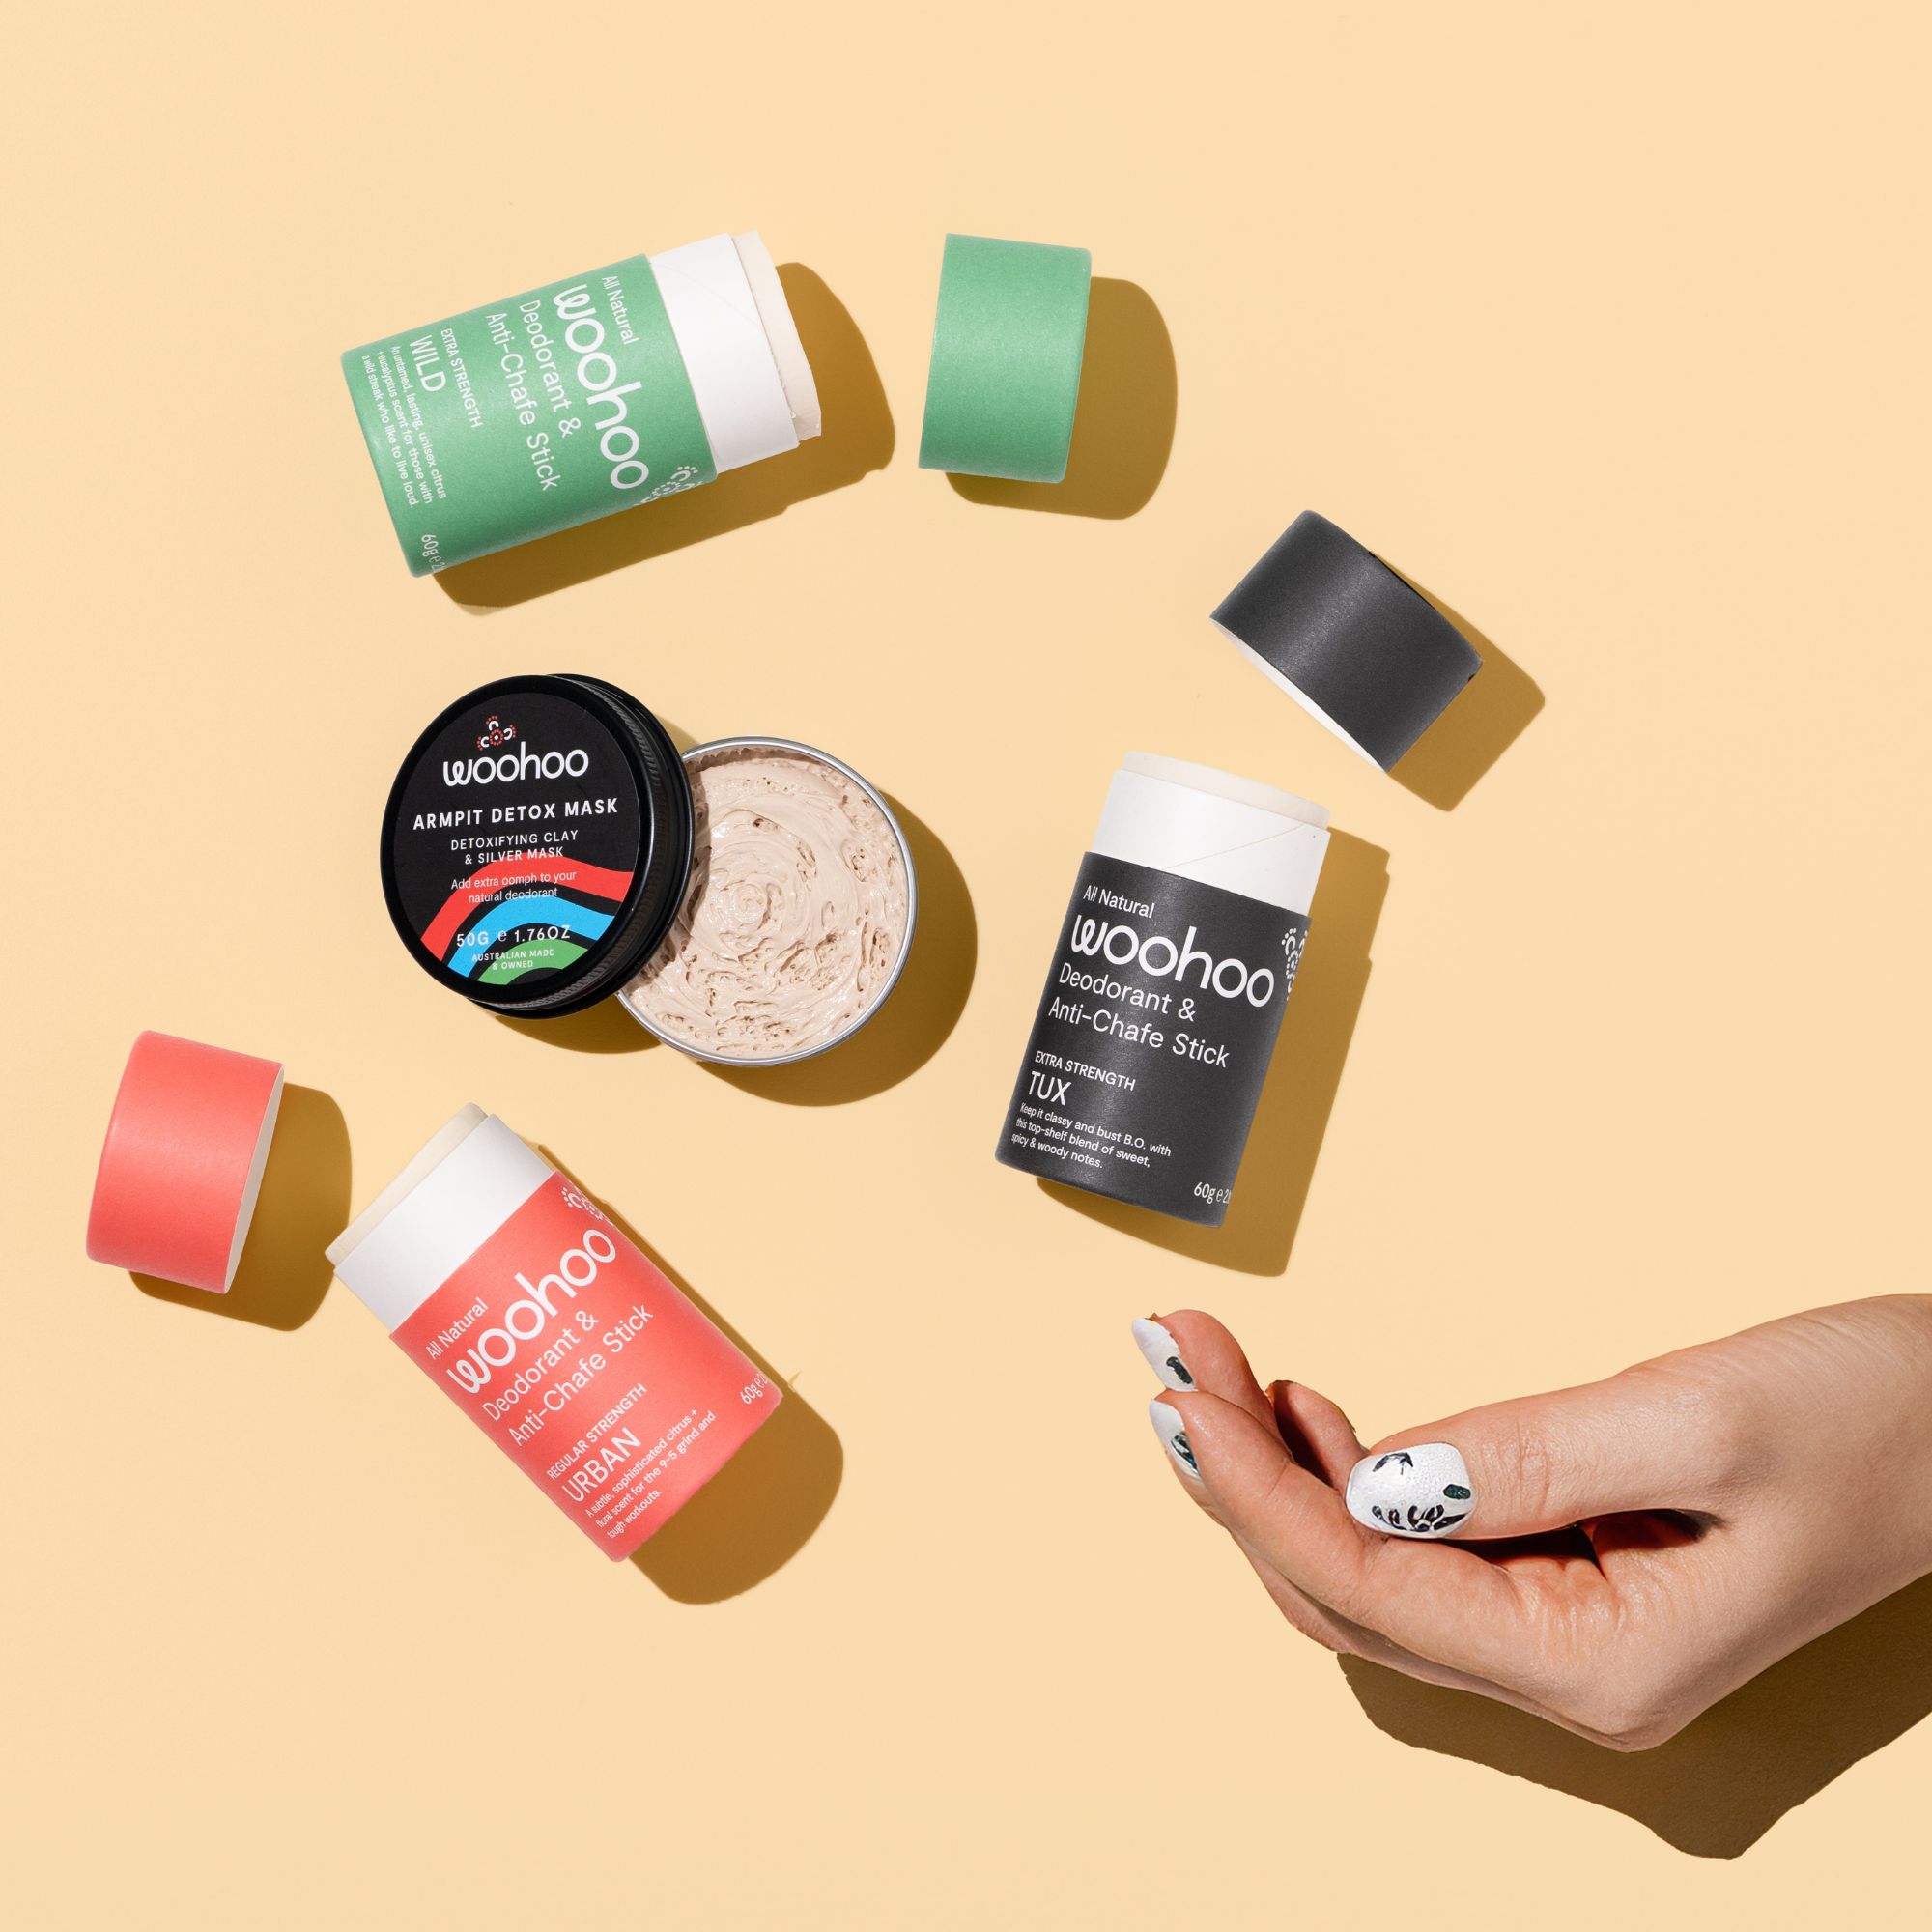 How To Use Wild Deodorant: A Beginner's Guide